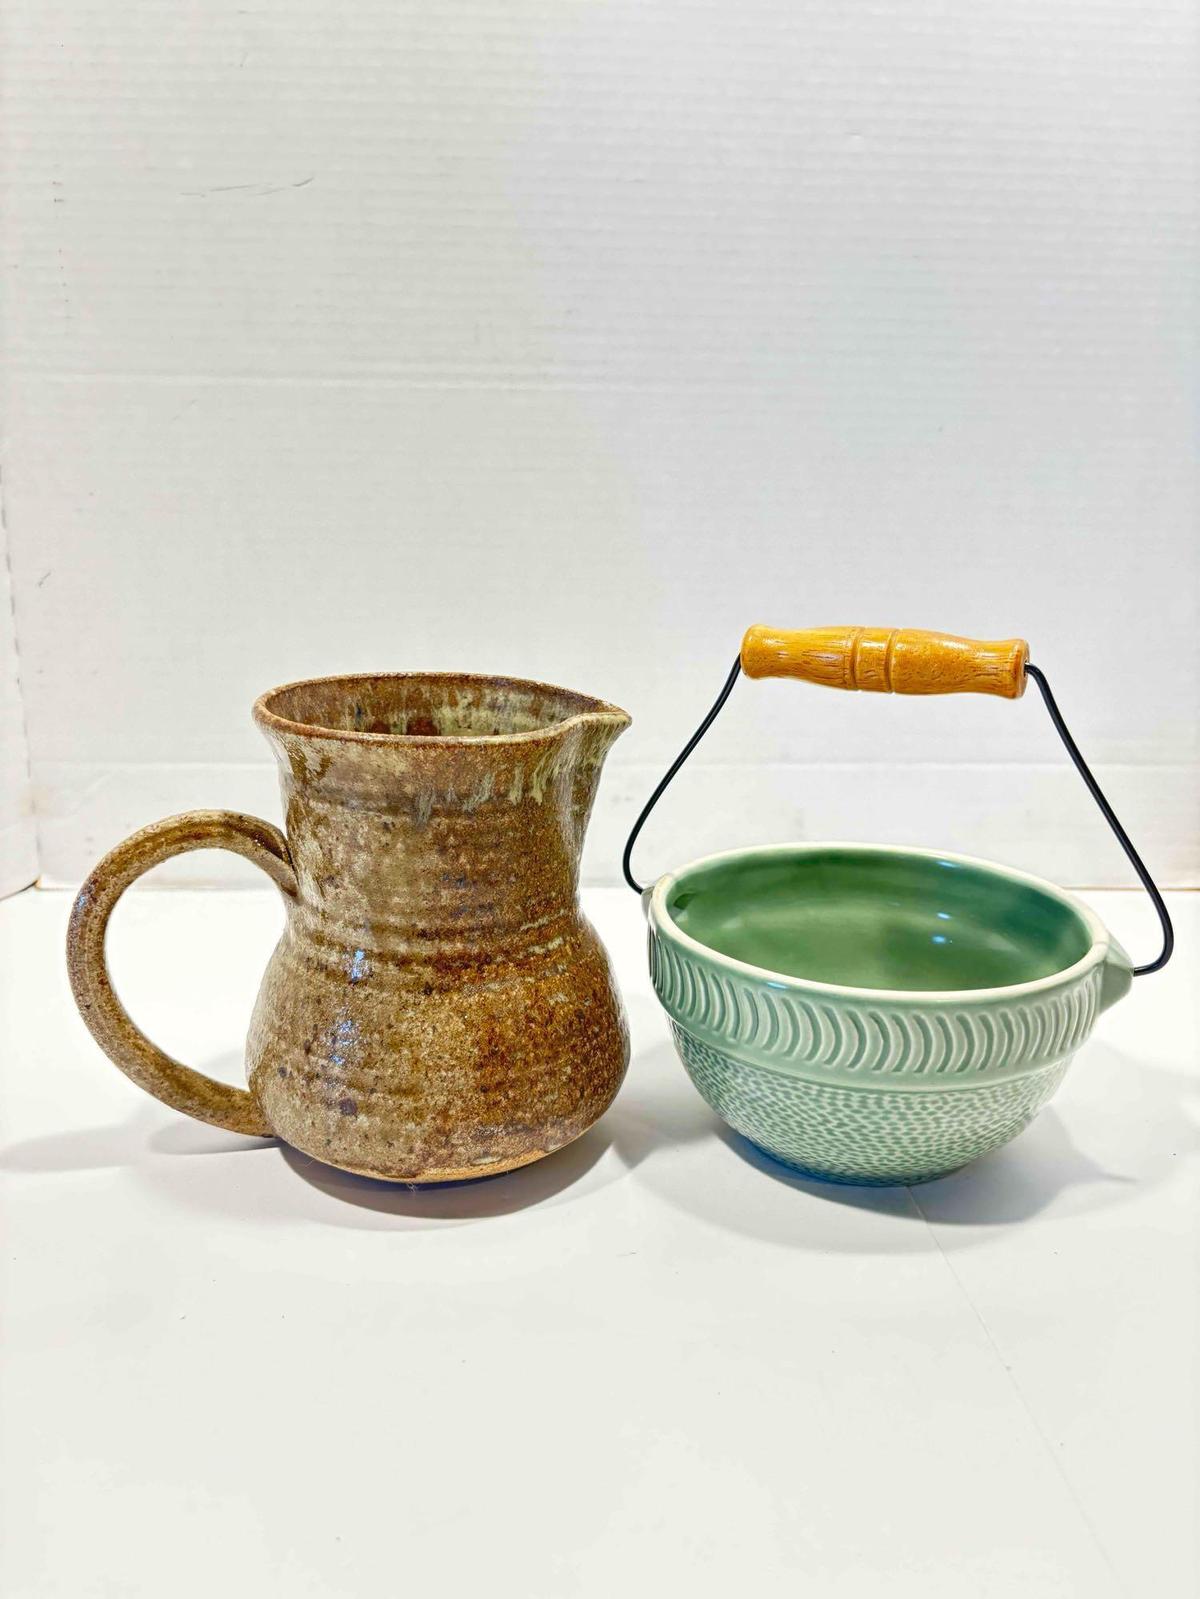 Small Pitcher and Bowl with Handle